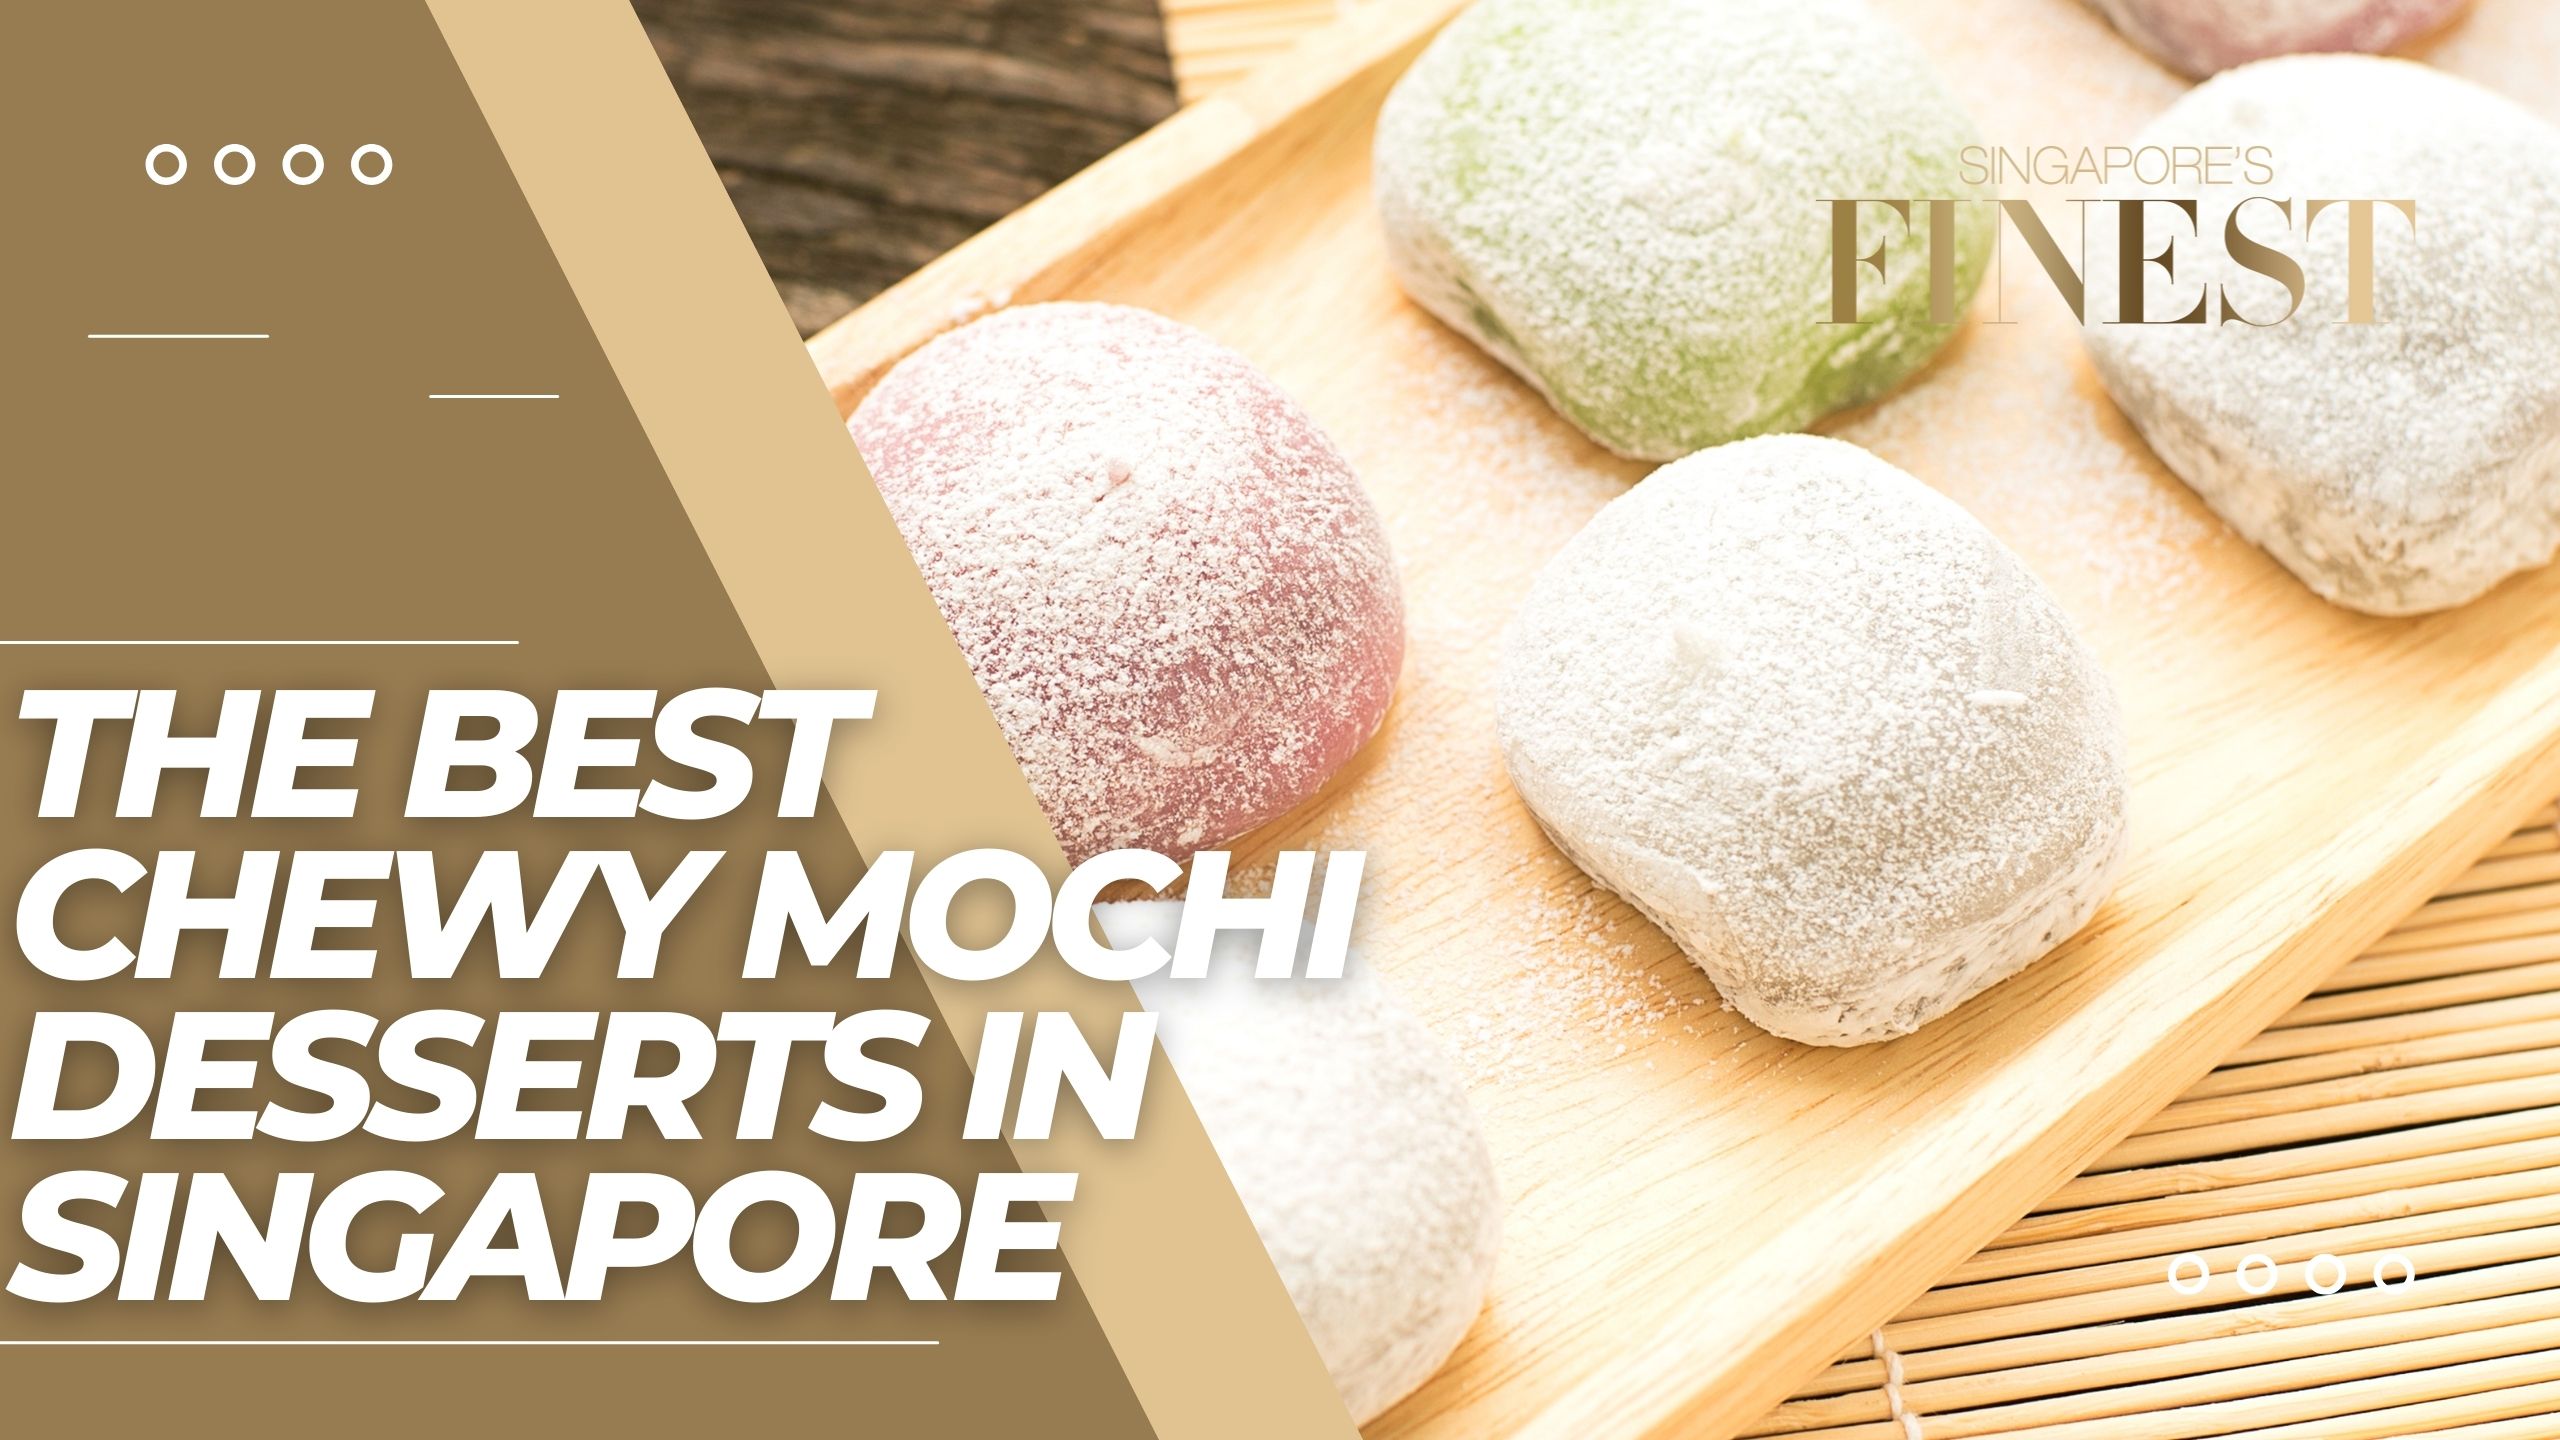 The Finest Chewy Mochi Desserts in Singapore